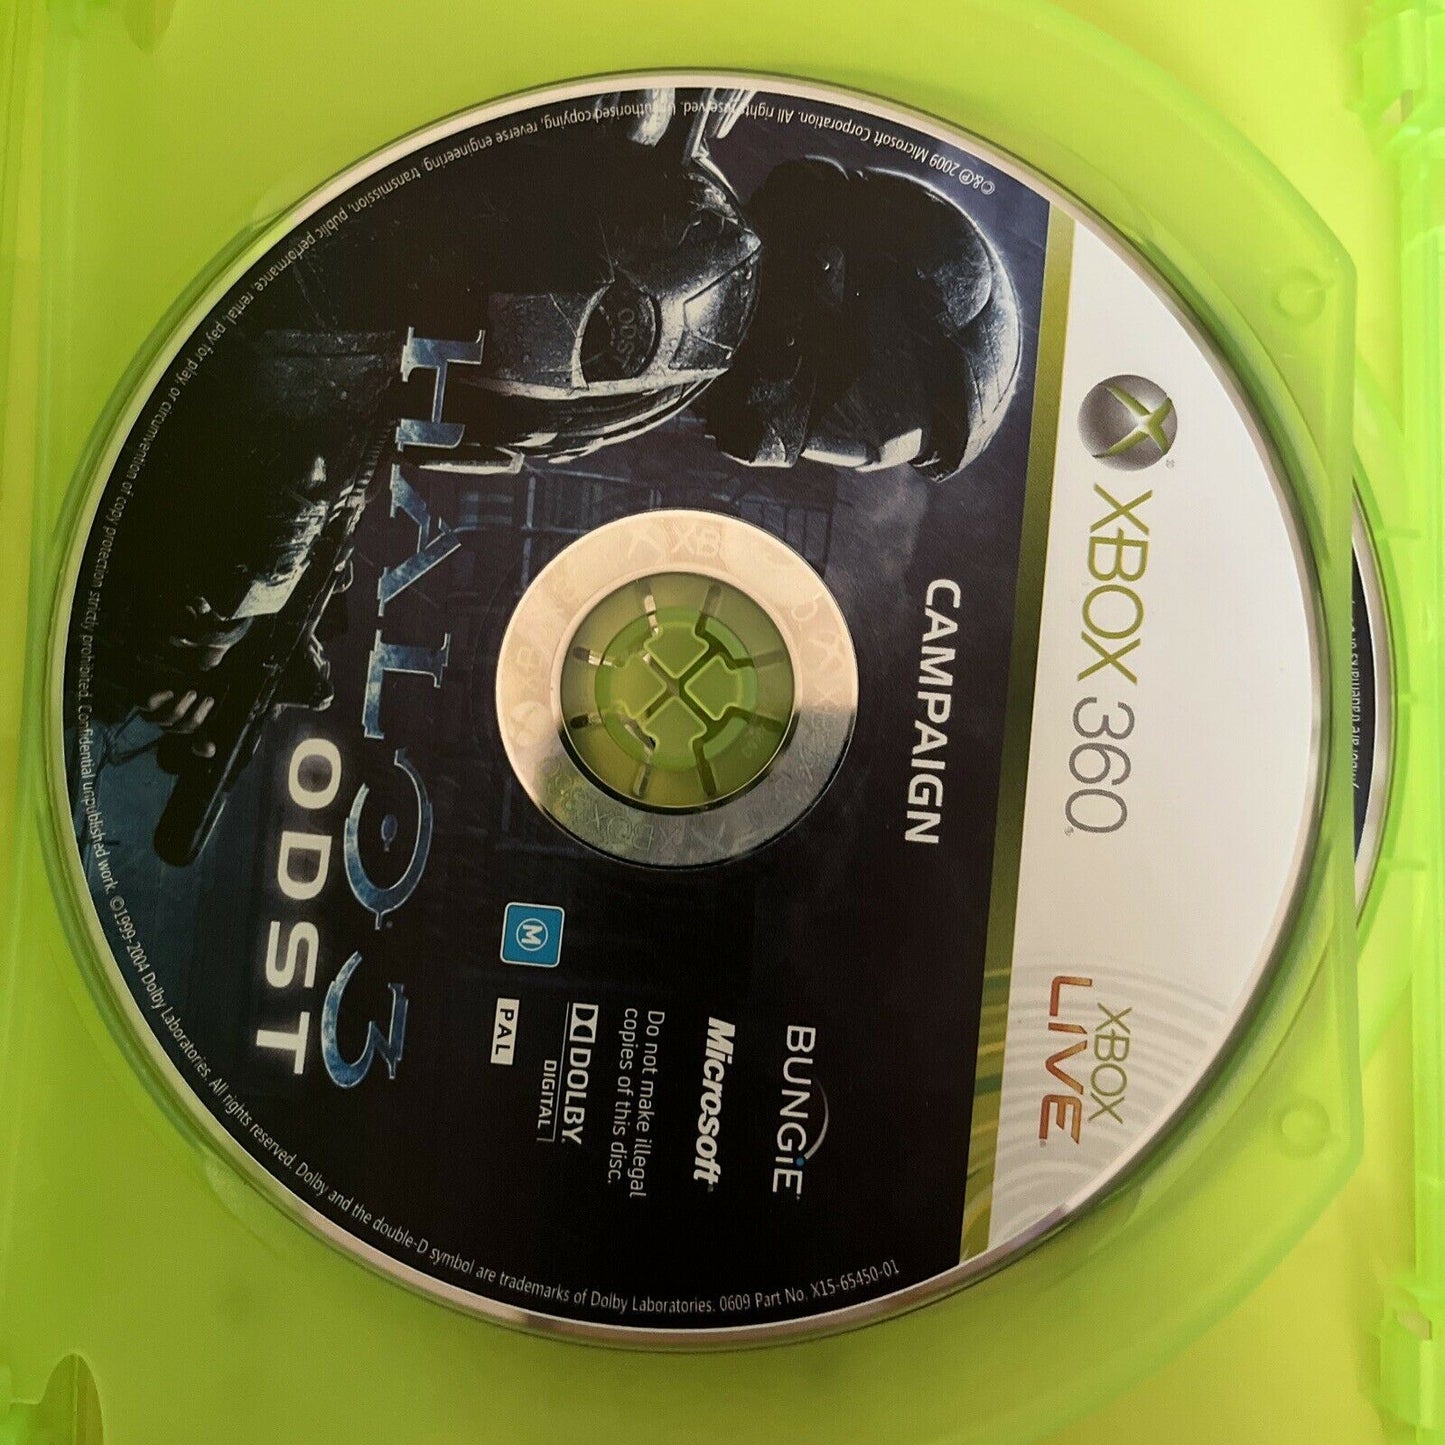 Halo 3 ODST - Microsoft XBOX 360 Game PAL with Manual